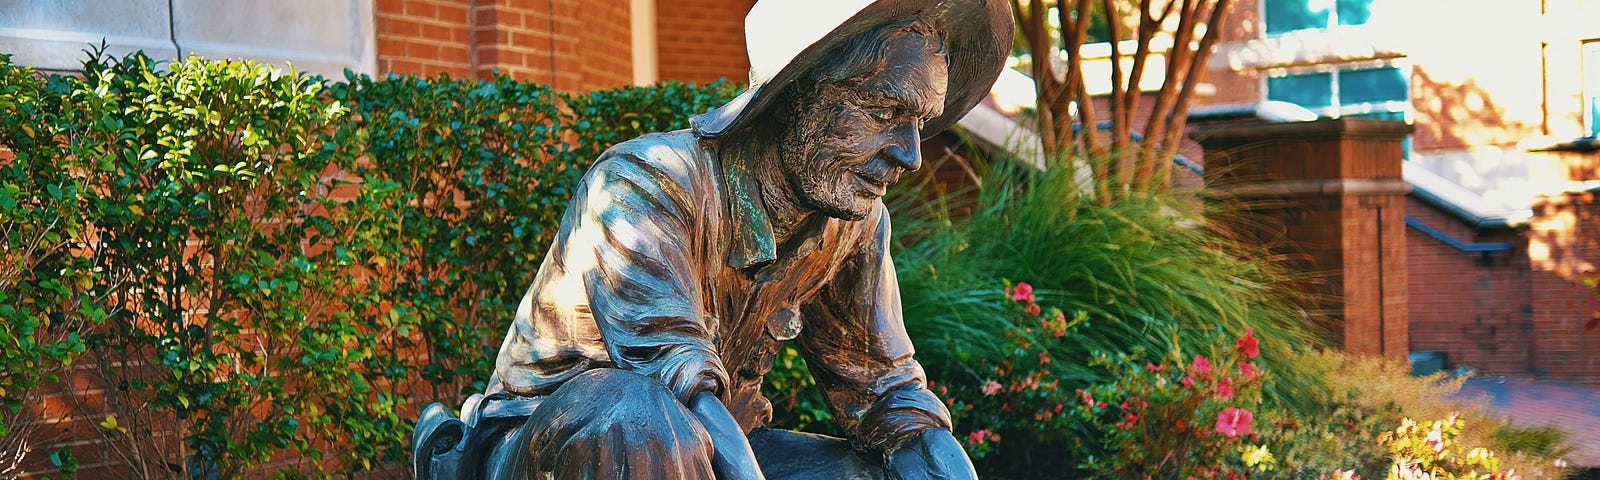 a statue of a miner panning for gold